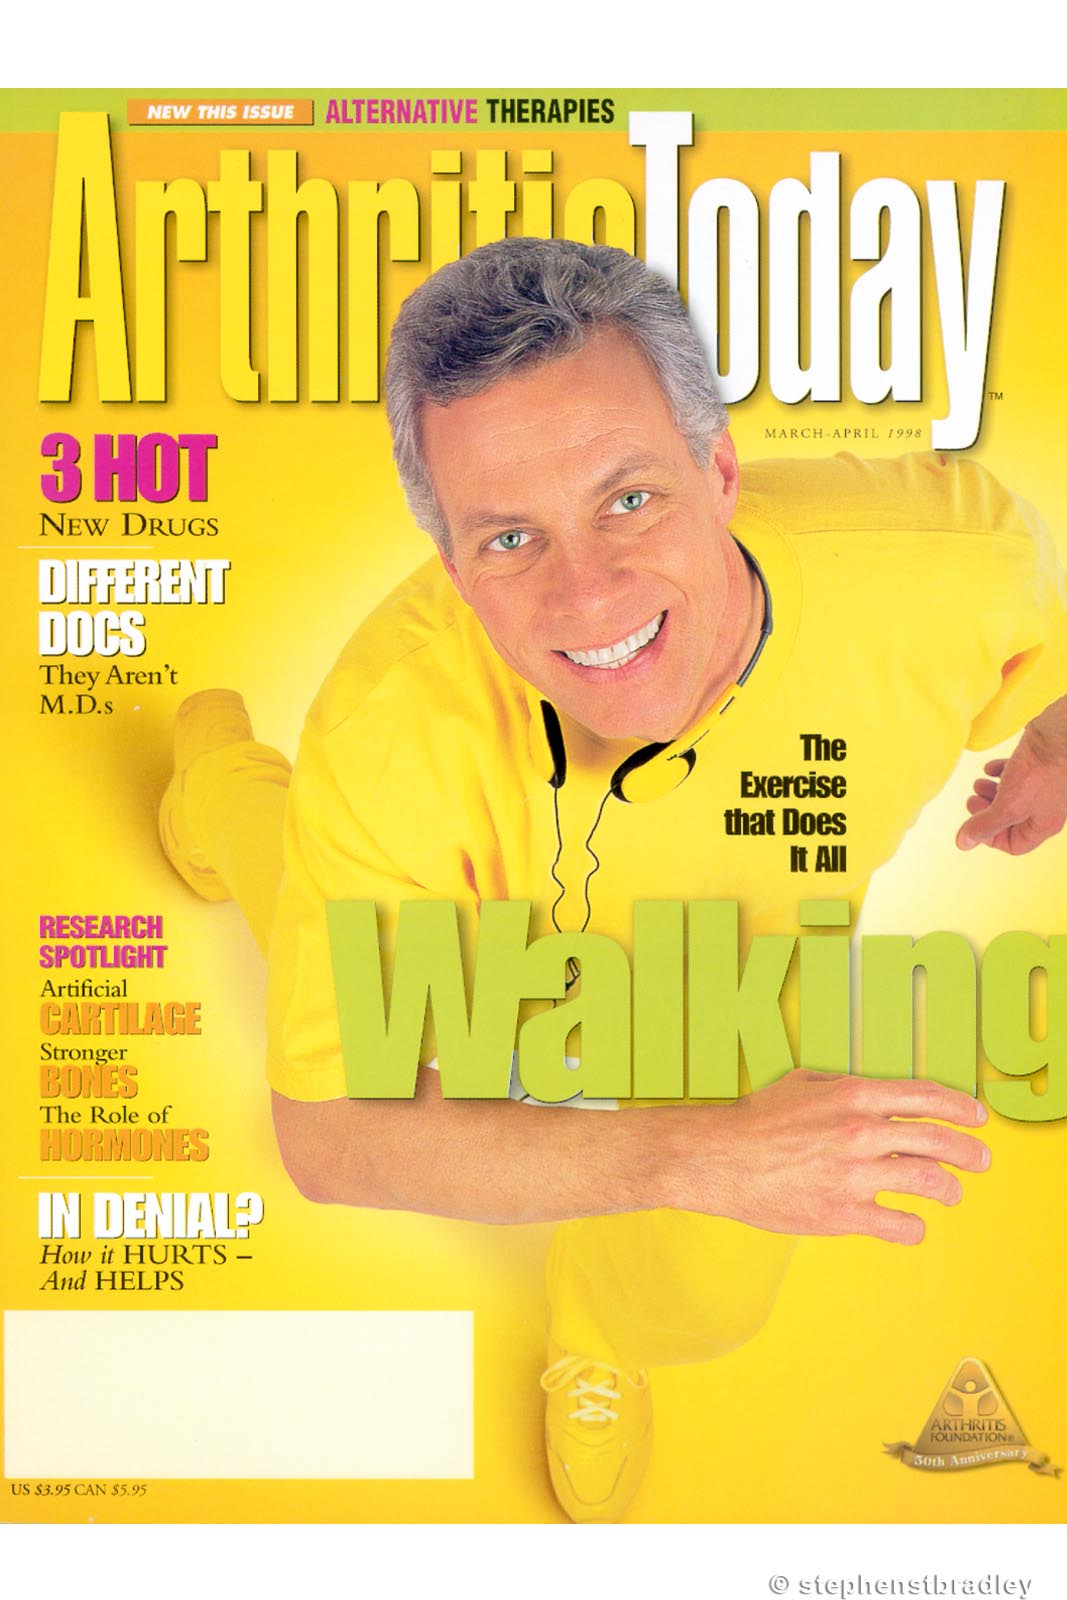 Editorial photography portfolio photo of man in yellow clothes and shoes photographed for Arthritis Today magazine - magazine cover photo by Stephen S T Bradley